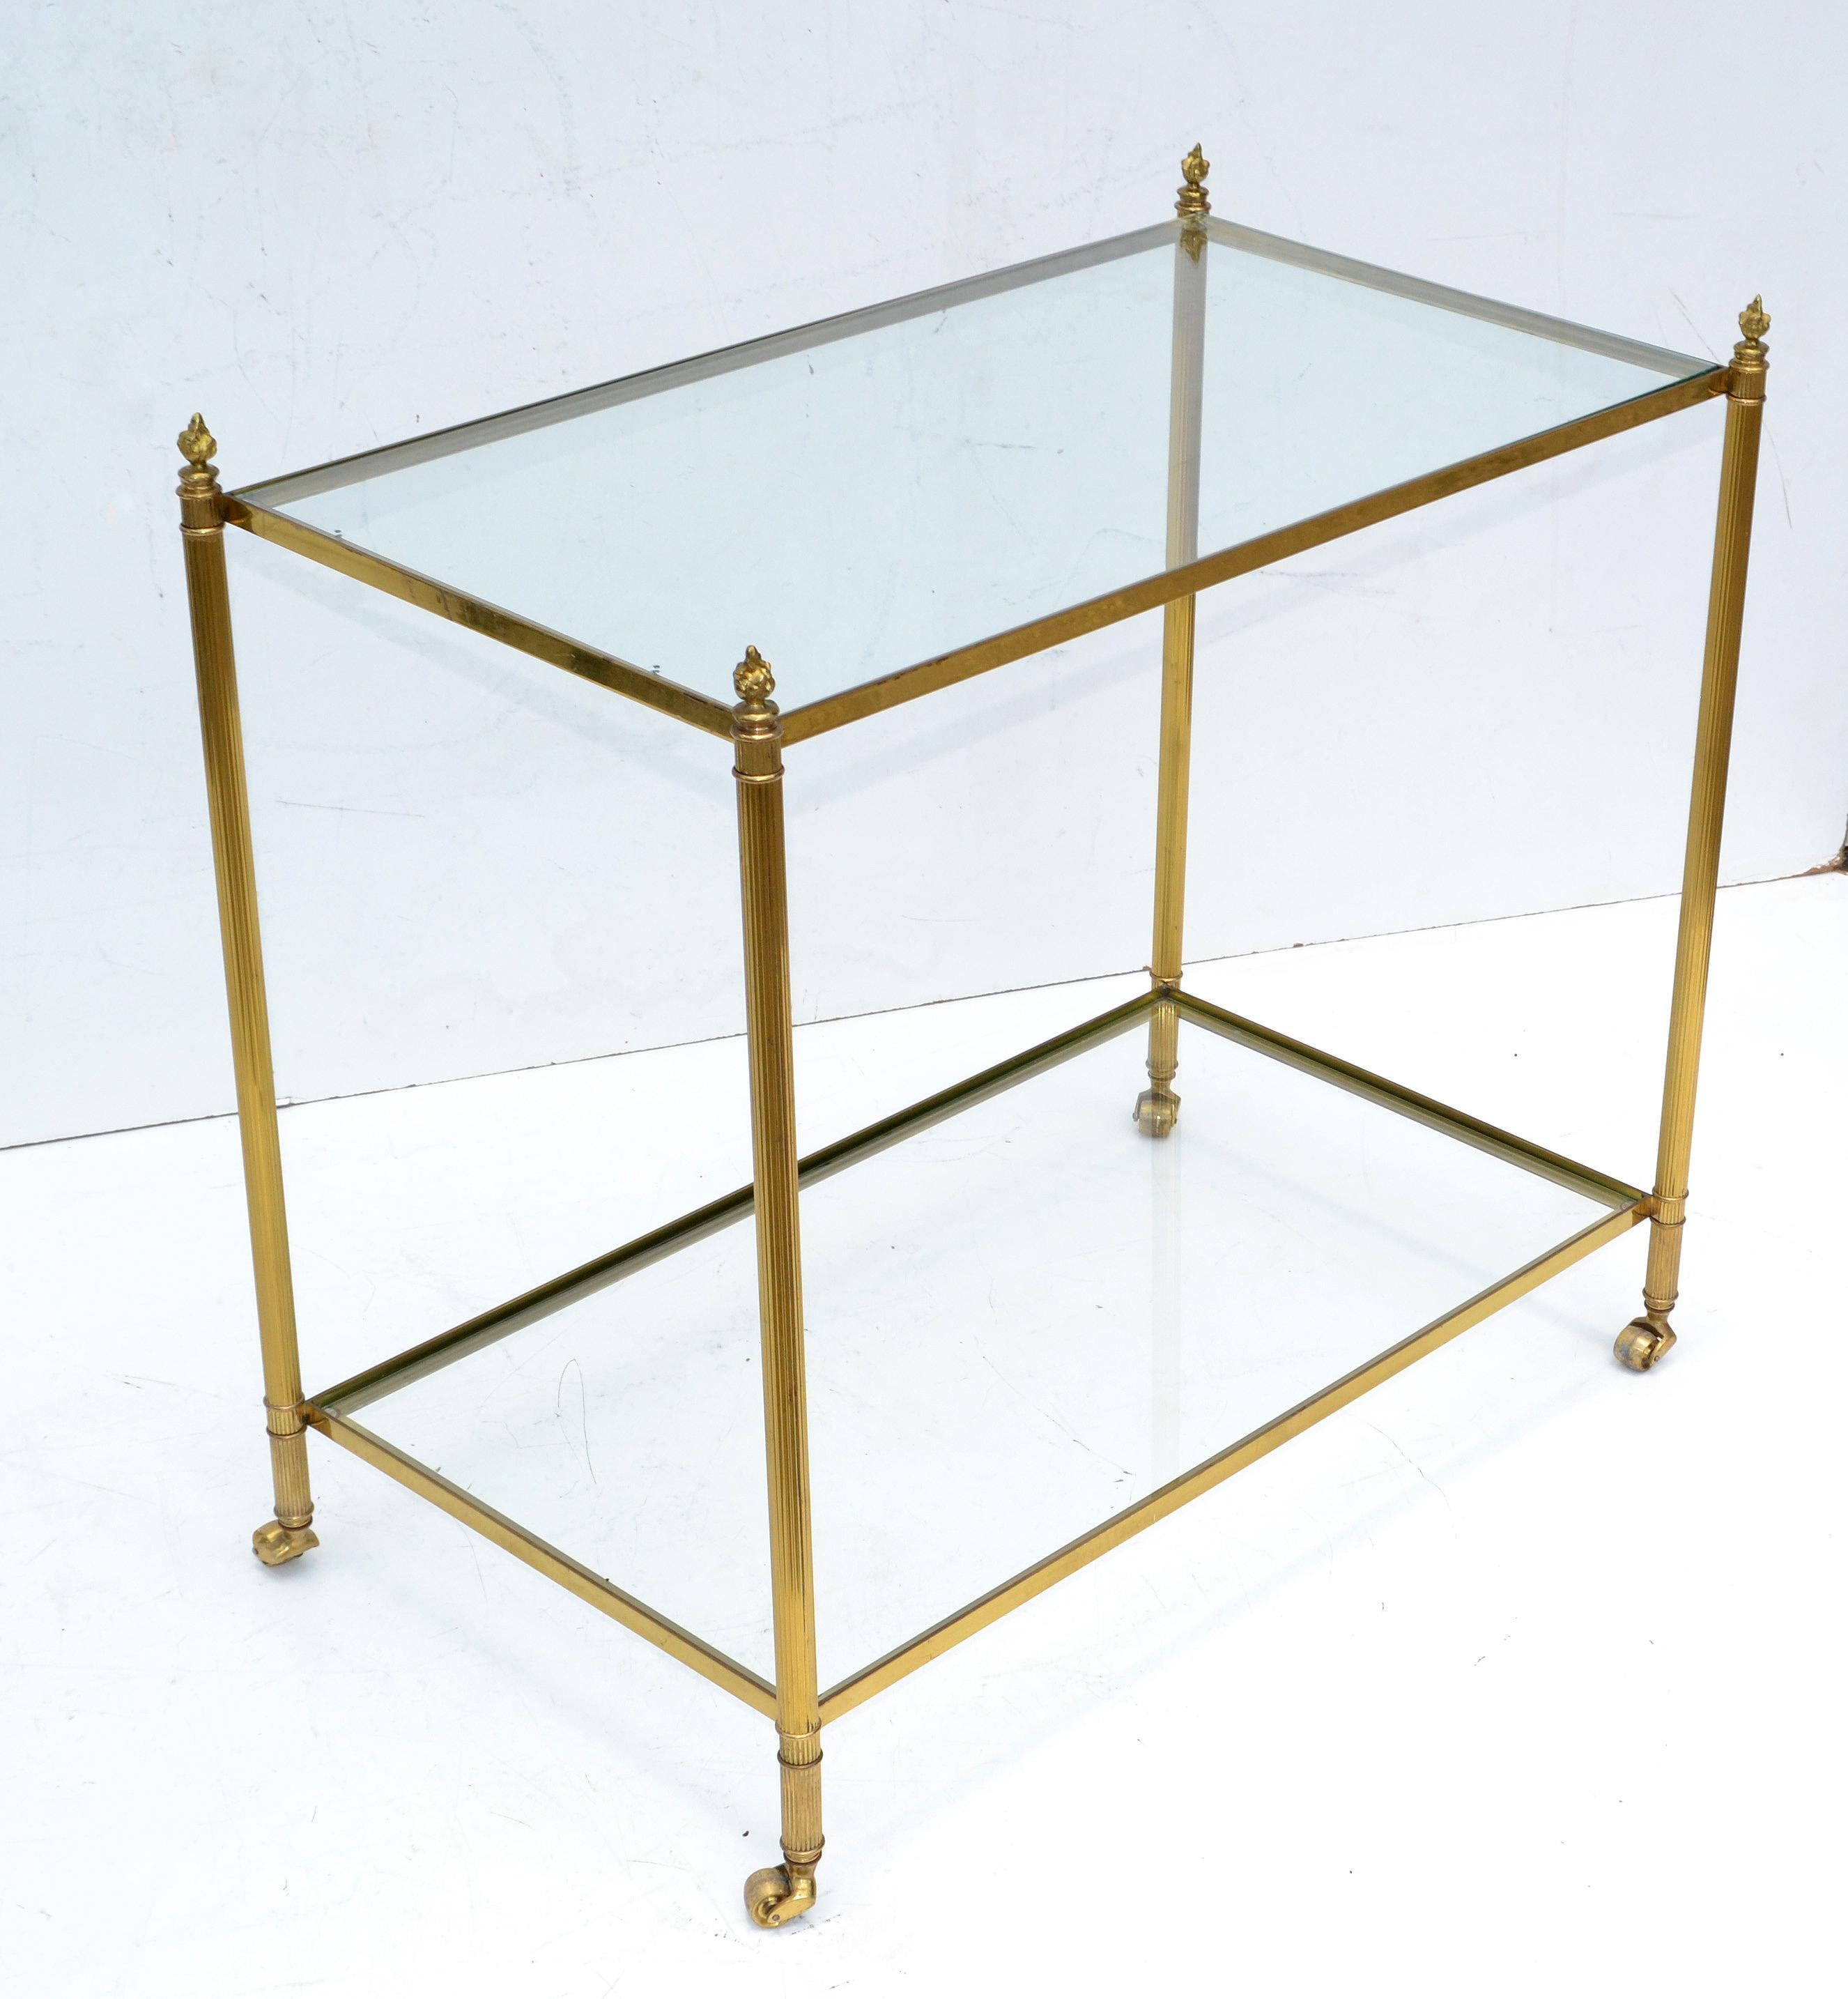 Superb 2-tier side table or serving cart by Maison Jansen neoclassical made in France circa 1960.
Bronze Core on Casters with clear Glass tops.
Great also as sofa, end or tea table.
Space in between measure: 20 inches.